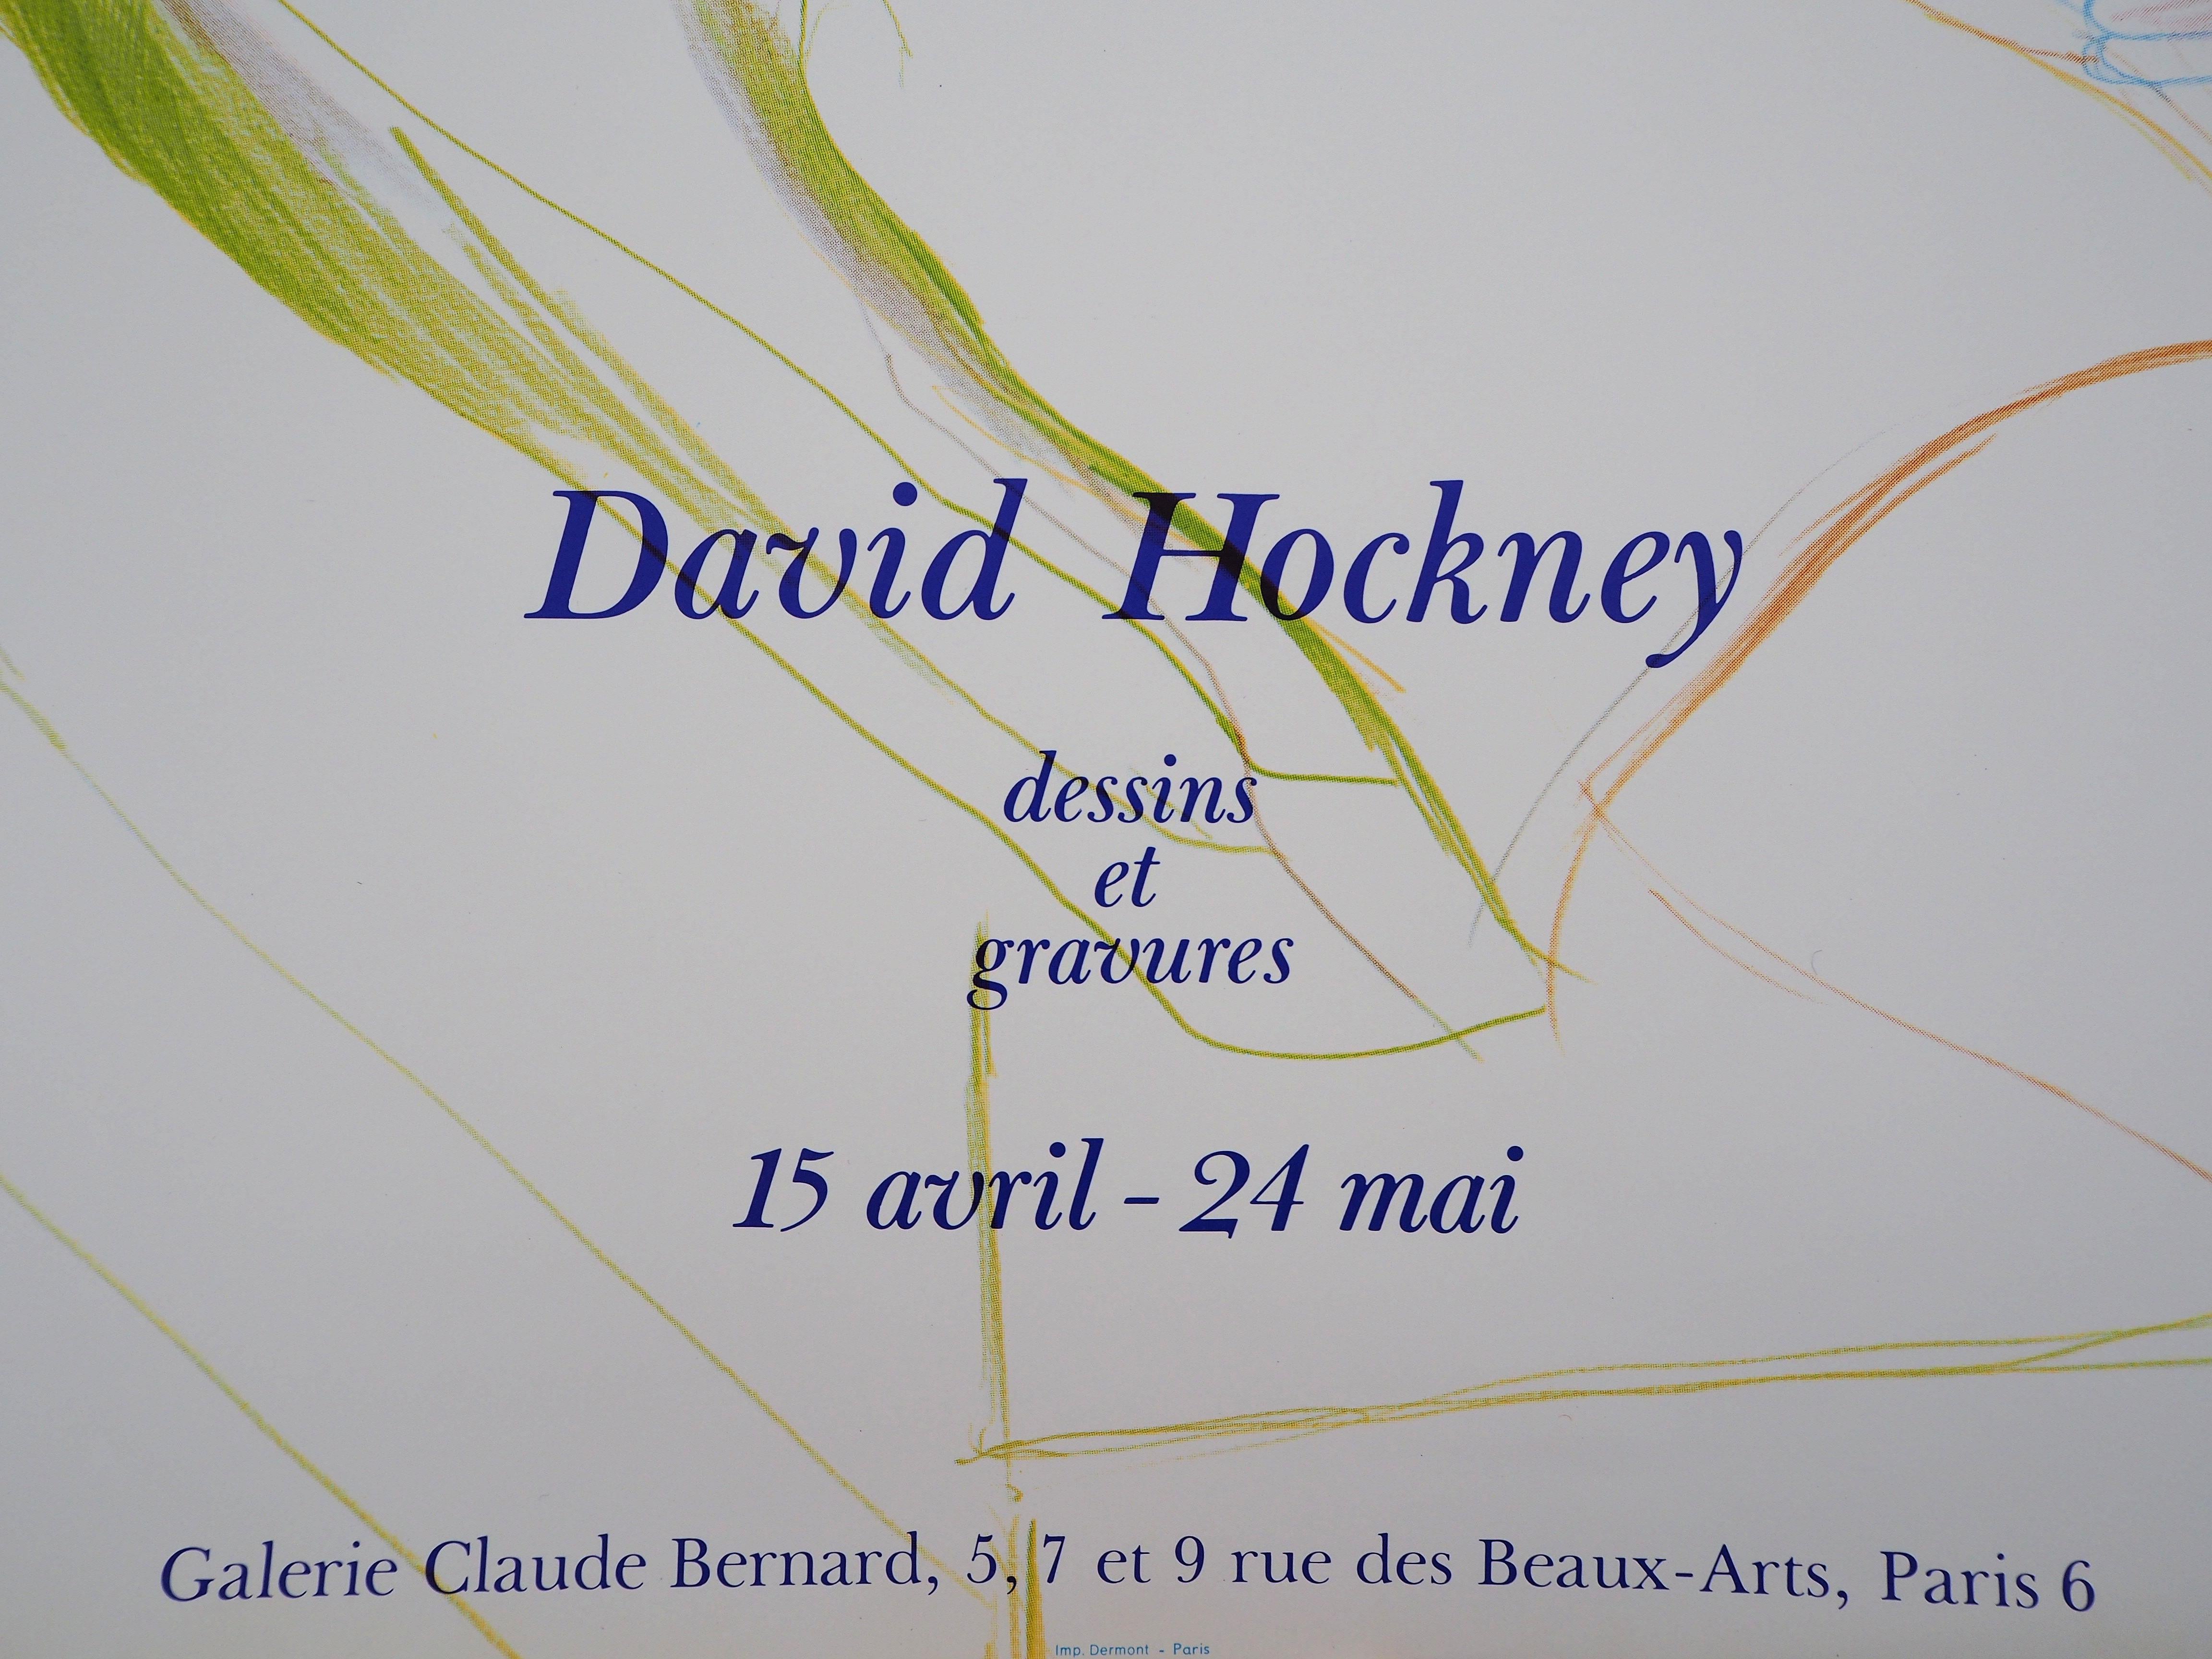 David HOCKNEY
Portrait of Reading Man

Original Vintage Poster (offset-lithograph)
Printed in France by Imprimerie Dermont in Paris
64 x 45 cm (c. 25.1 x 17.7 inch)
This poster was created for the exhibition 